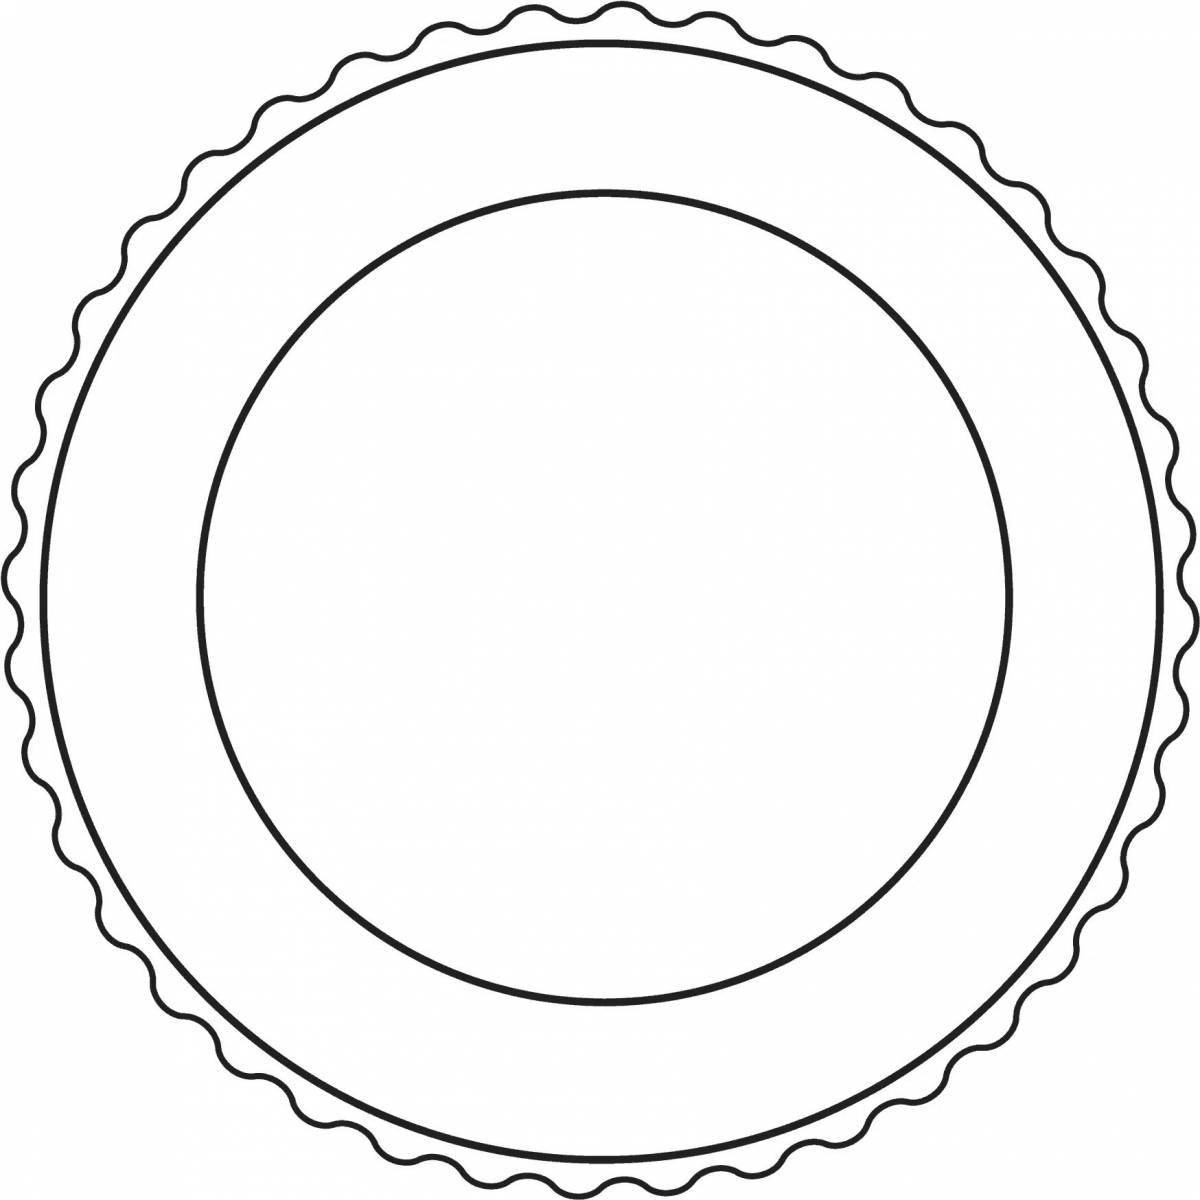 Luminous plate coloring page